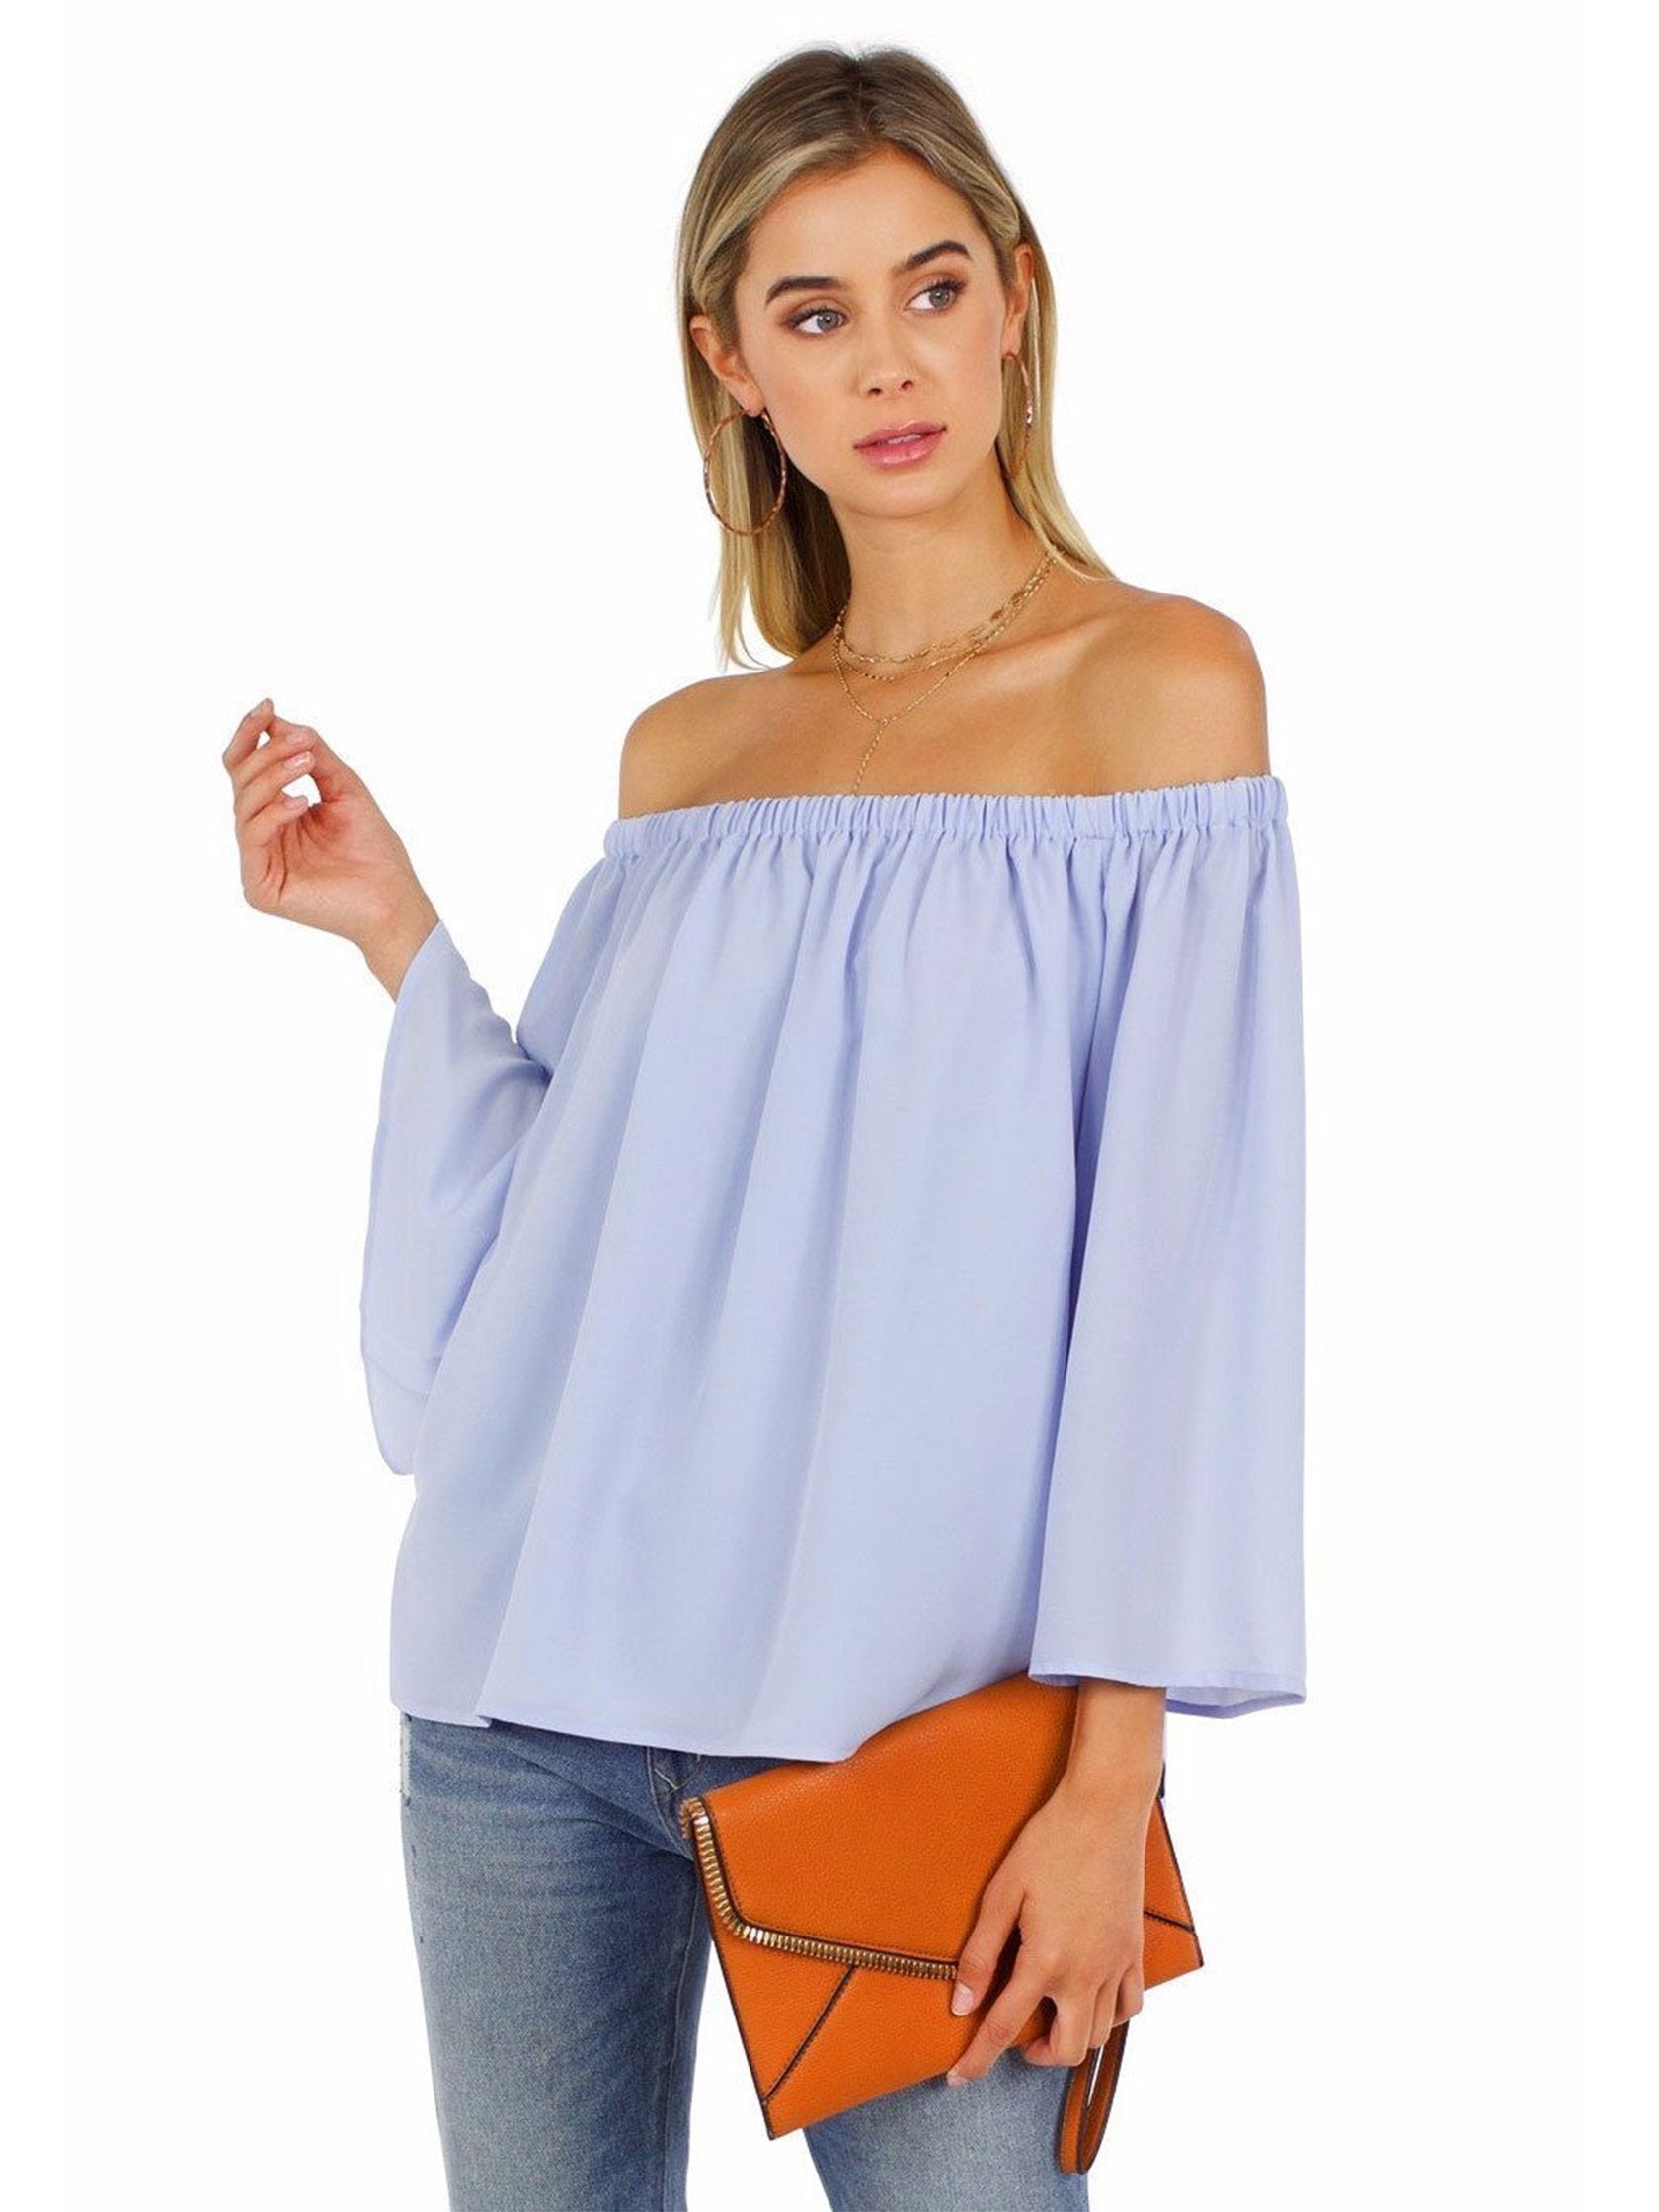 Girl outfit in a top rental from French Connection called Off Shoulder Top